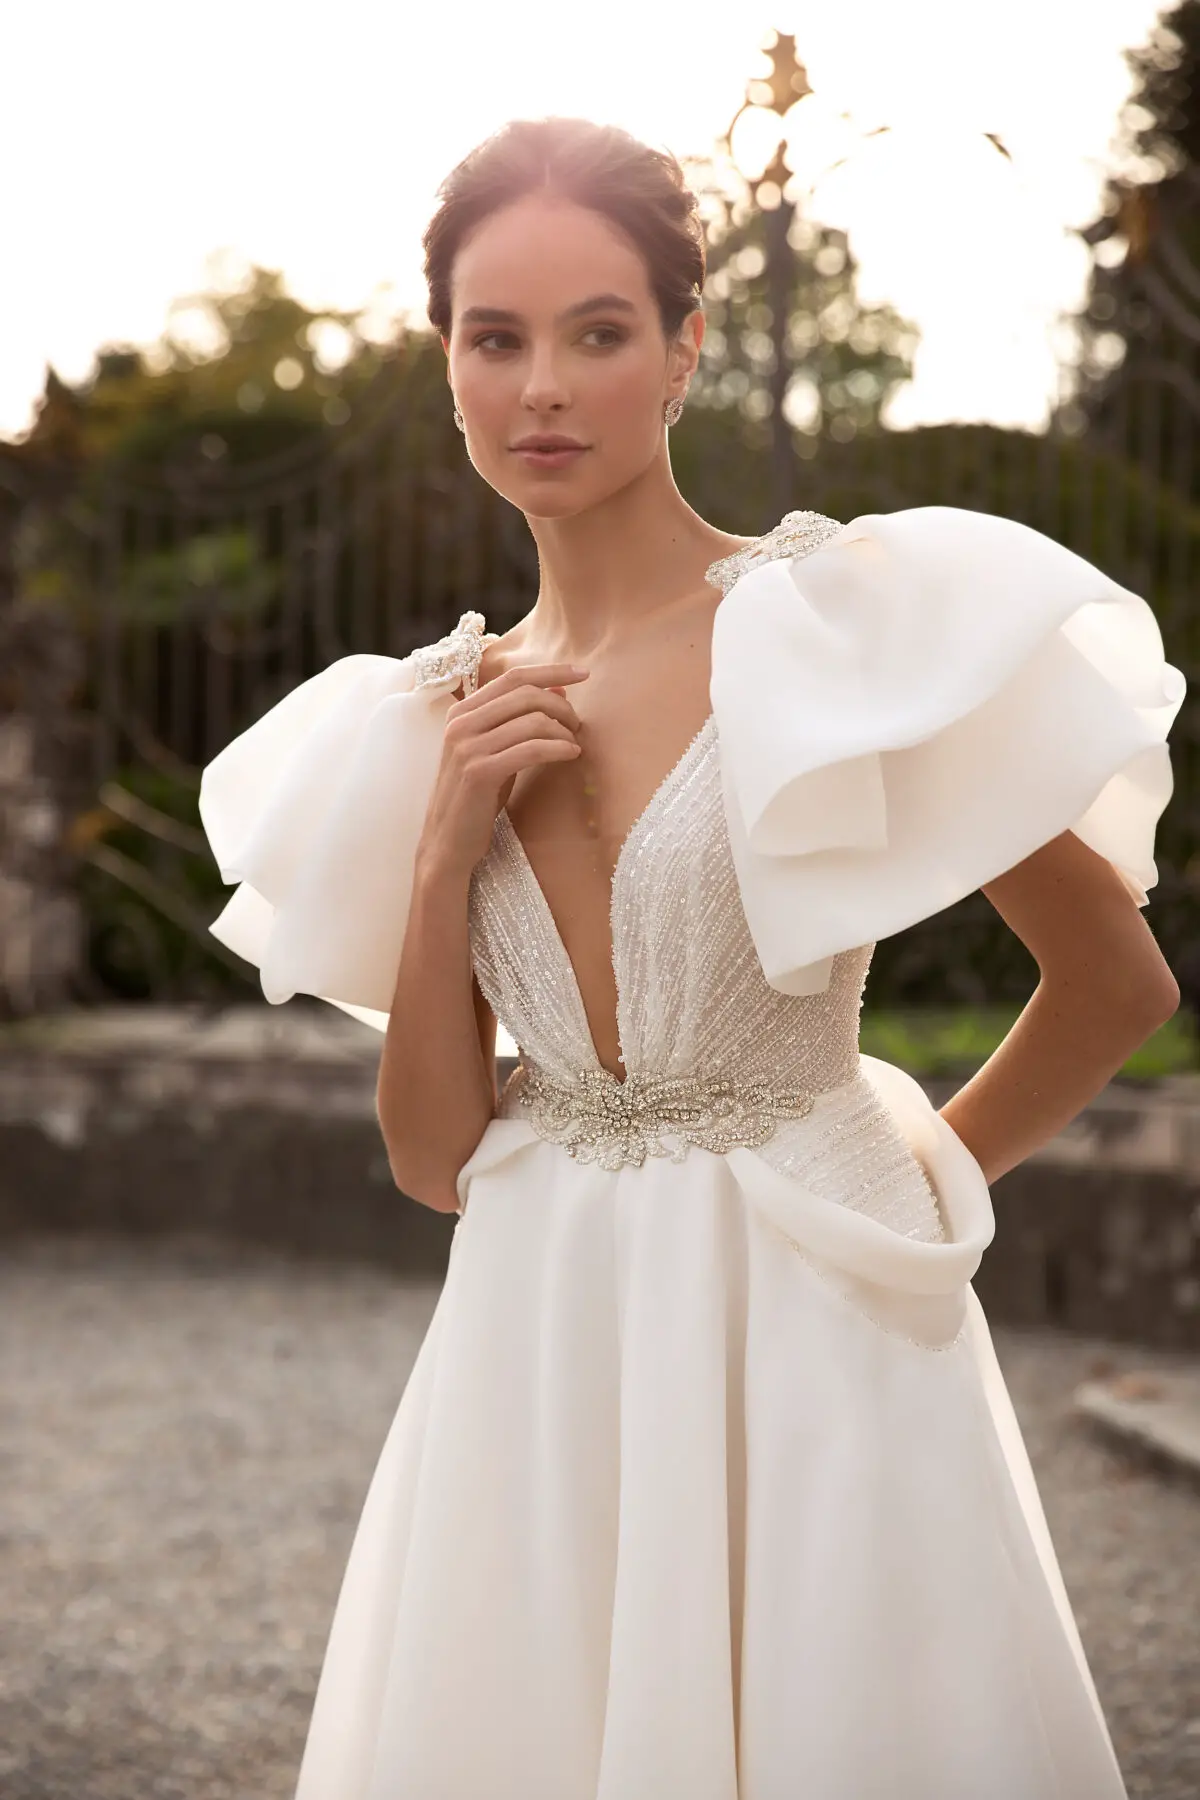 2023 Wedding Dress Trends - Pollardi - Elaborate gowns - One and only